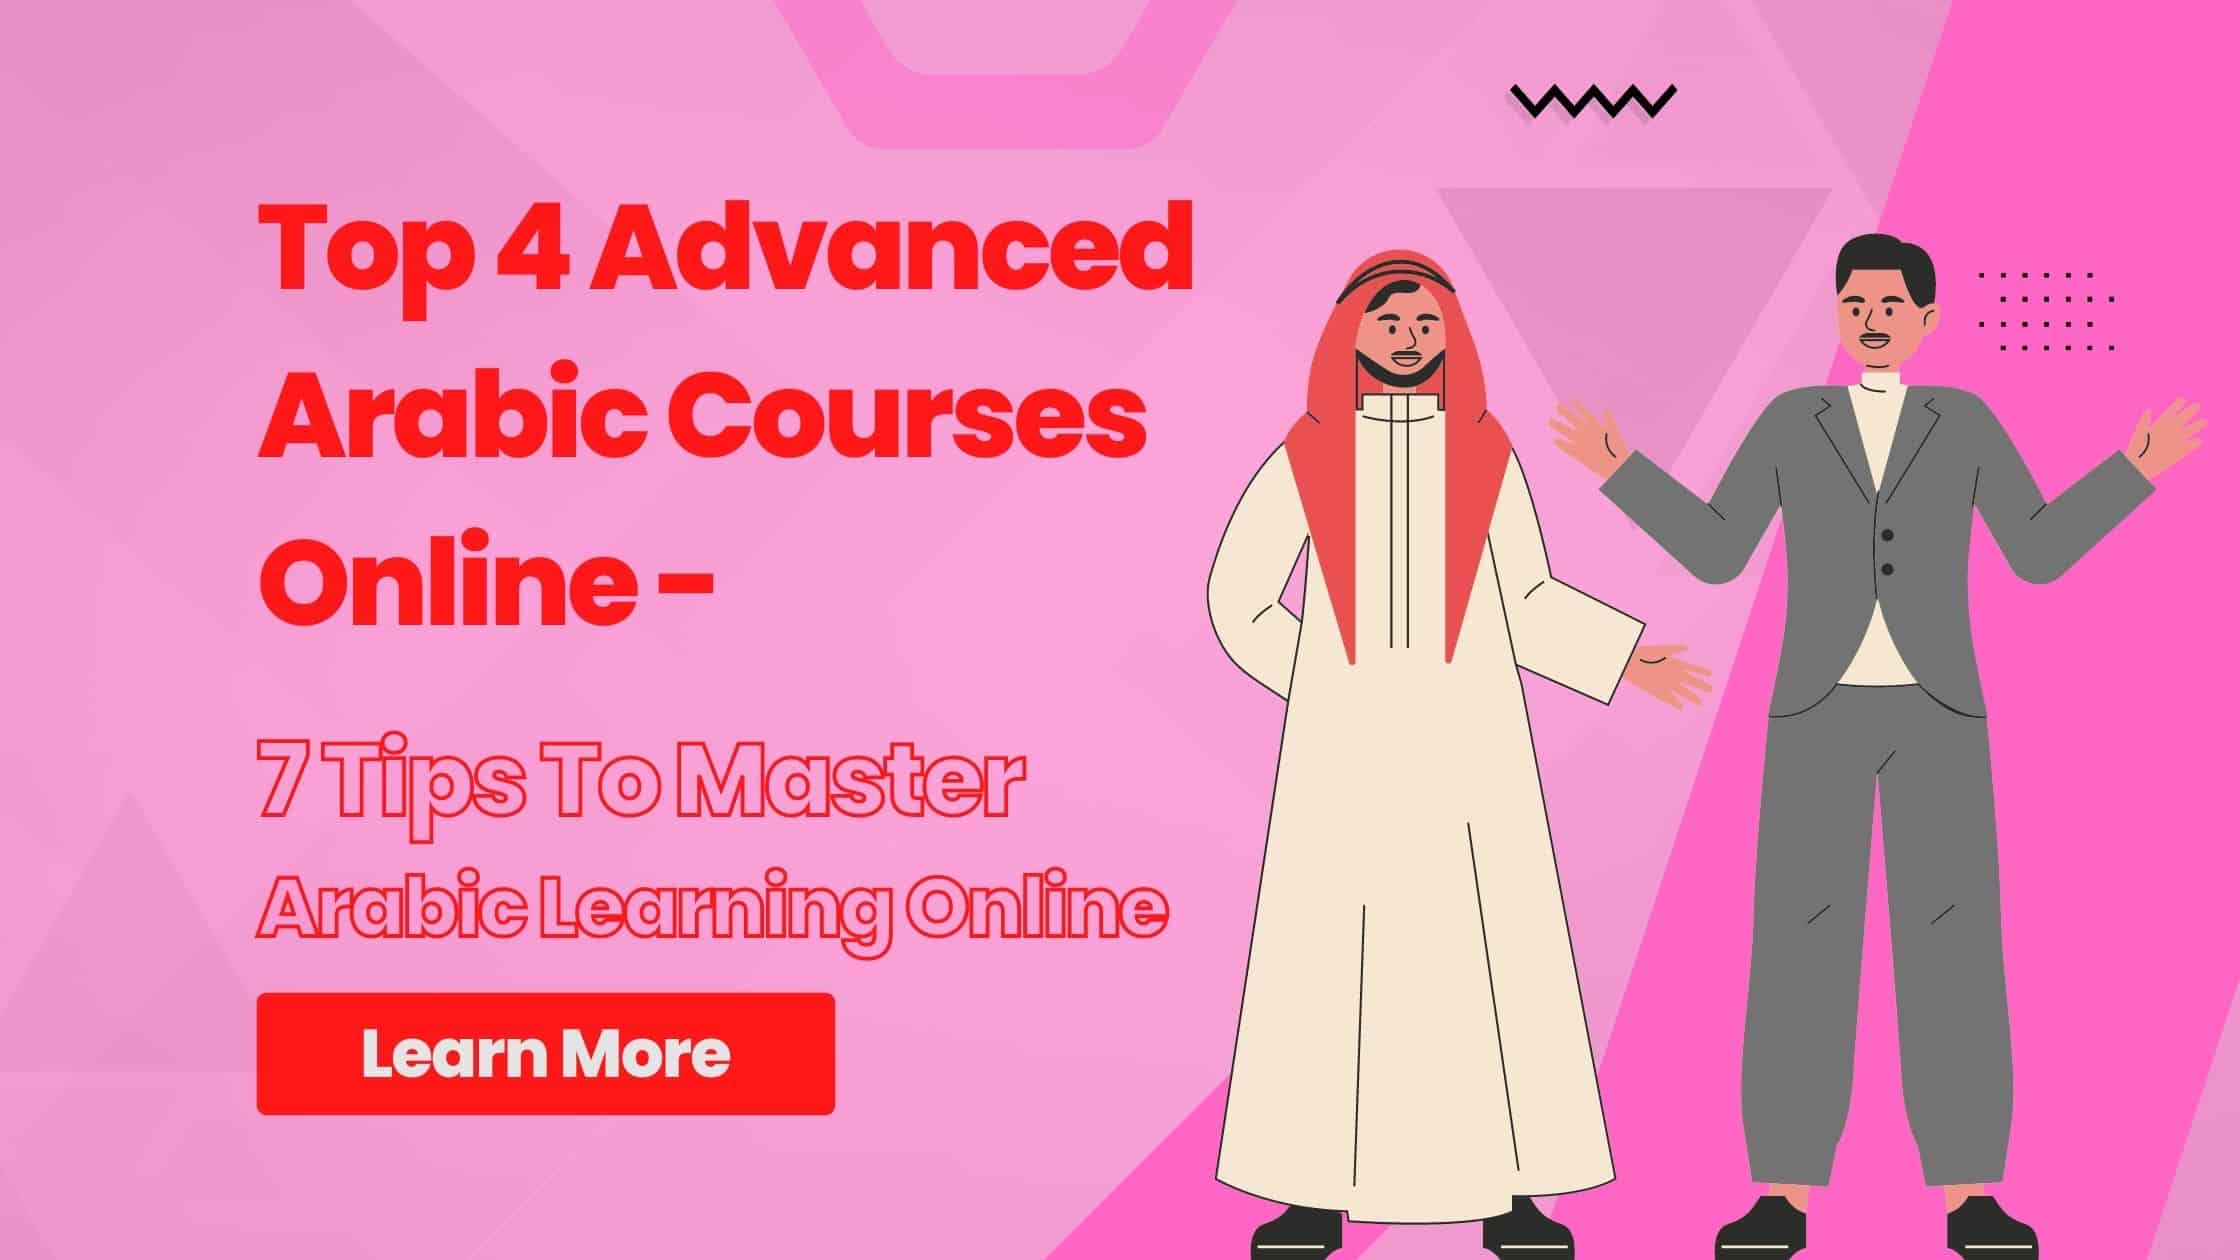 Top 4 Advanced Arabic Courses Online - 7 Tips To Master Arabic Learning ...